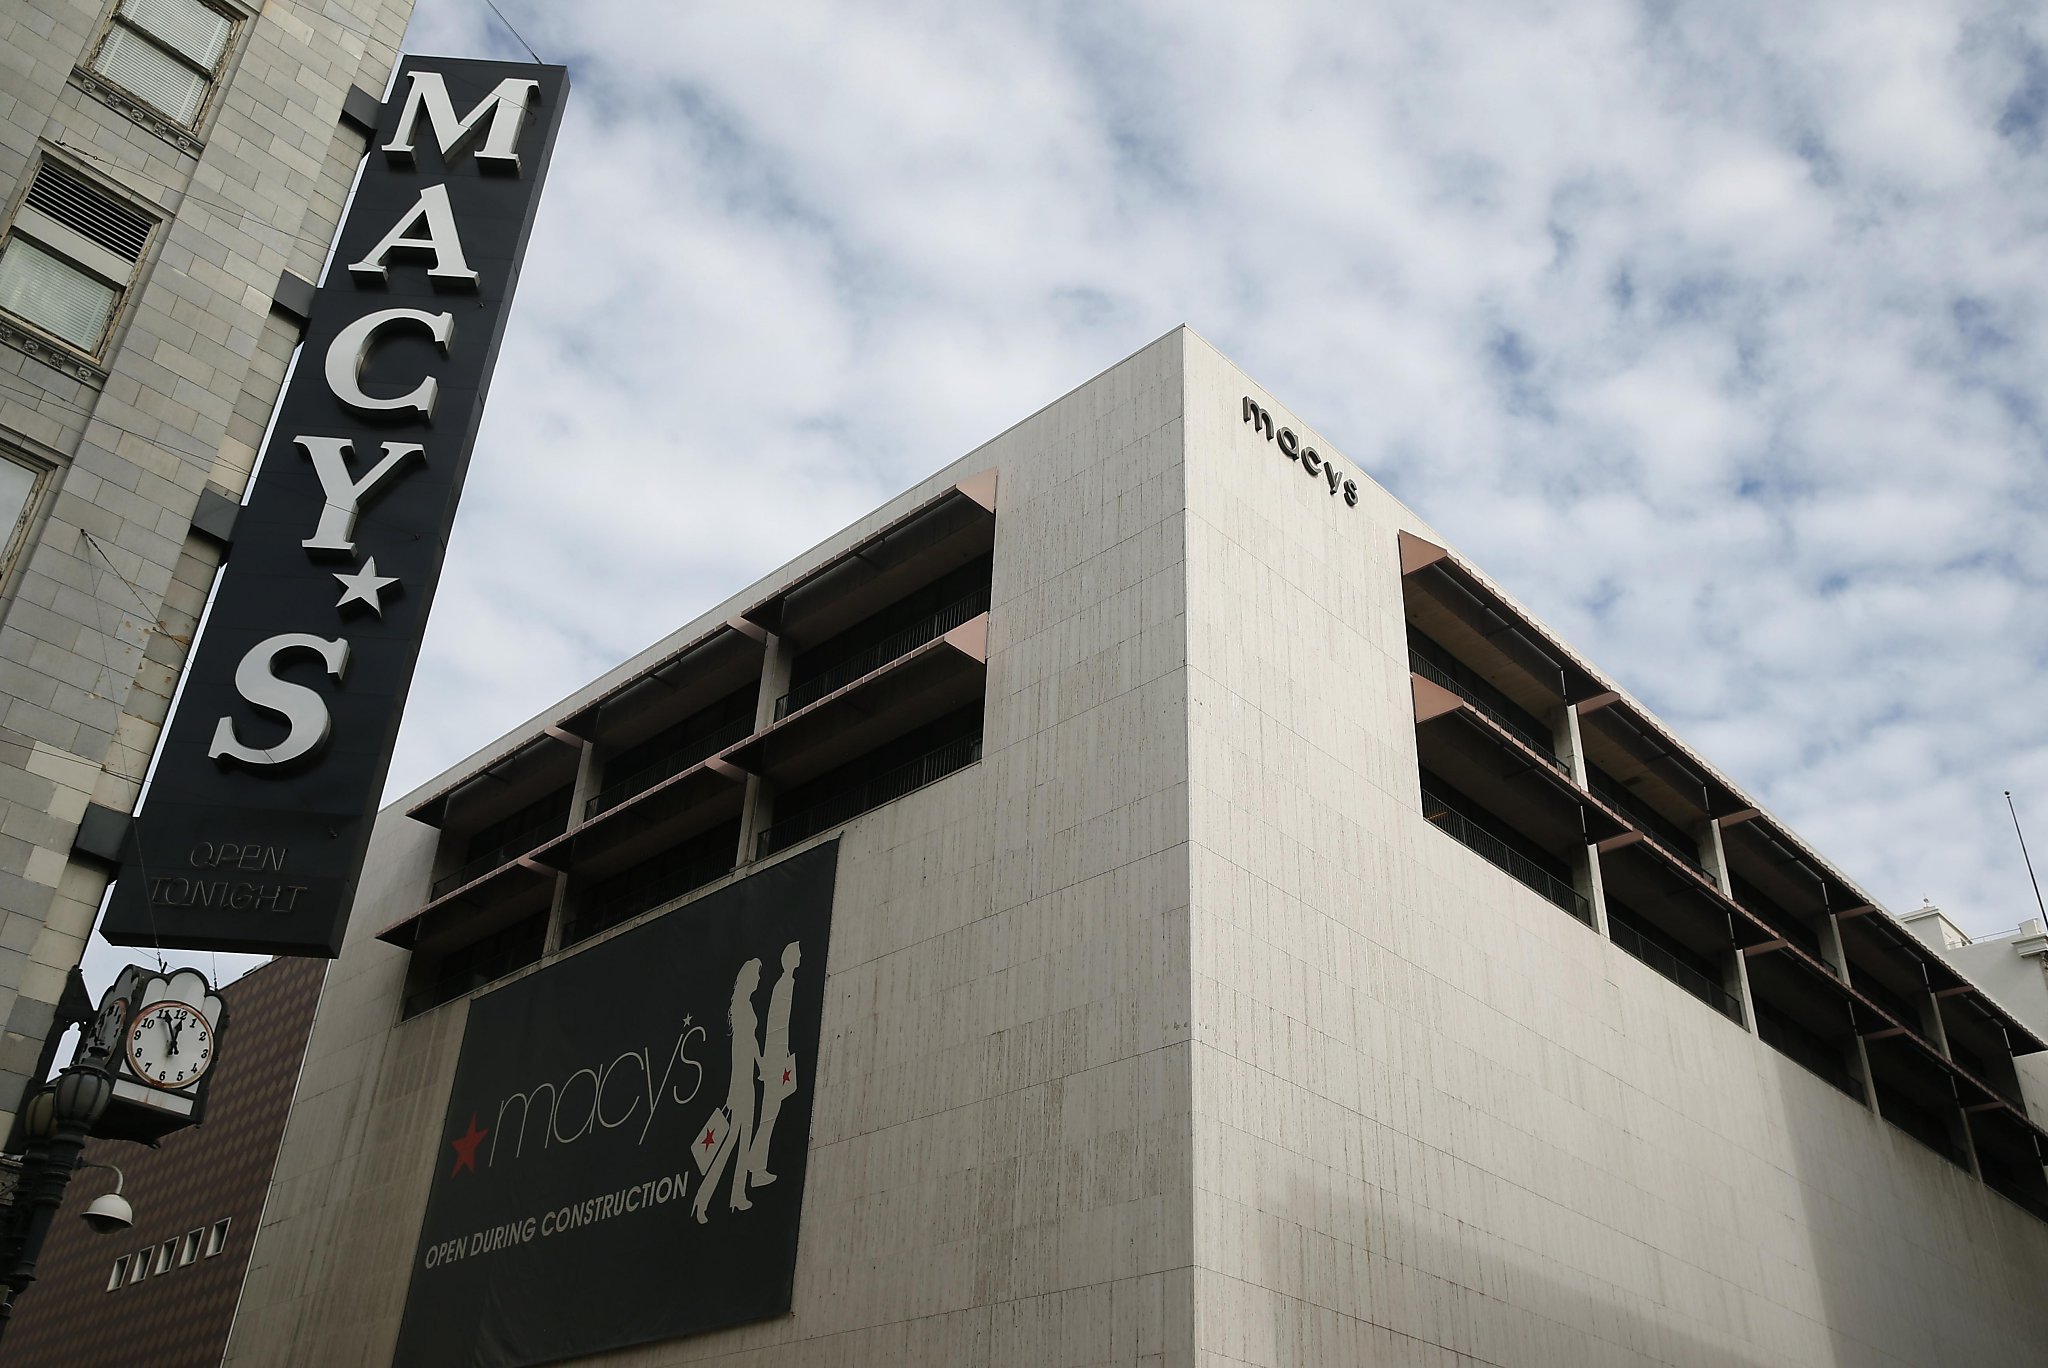 New plan for old Macy's building: Condos atop Union Square icon